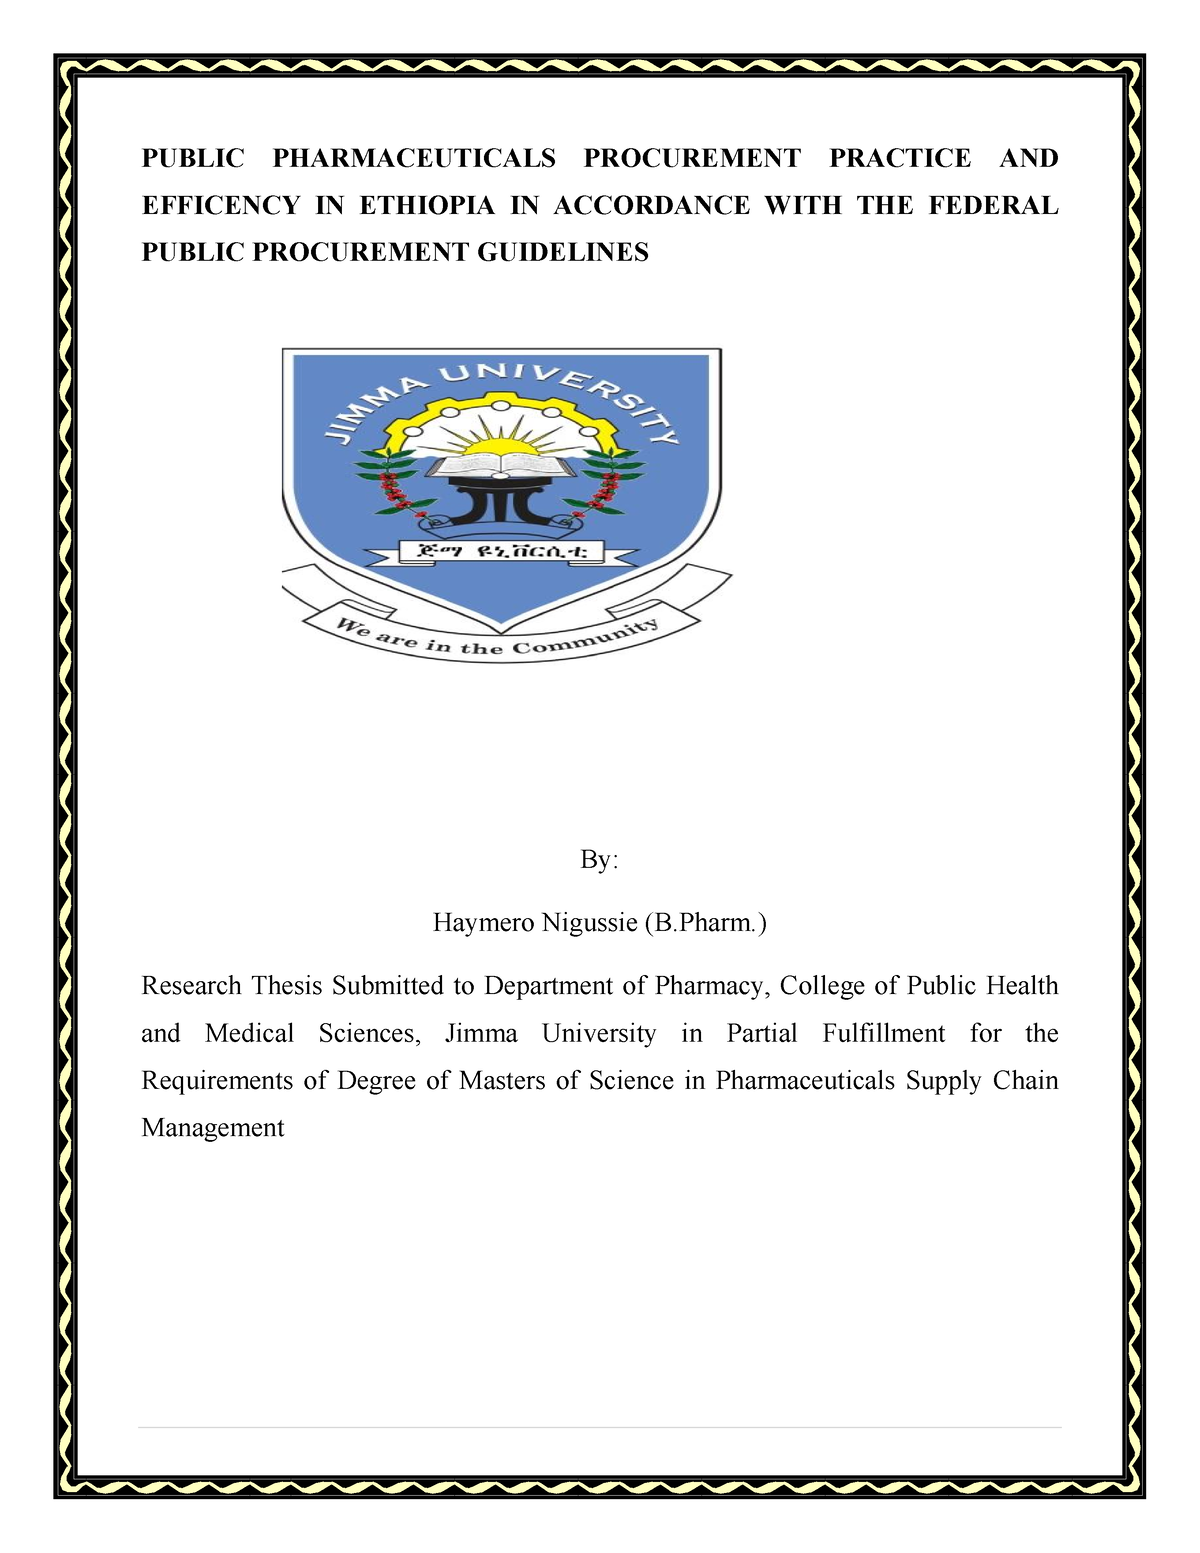 thesis on management in ethiopia